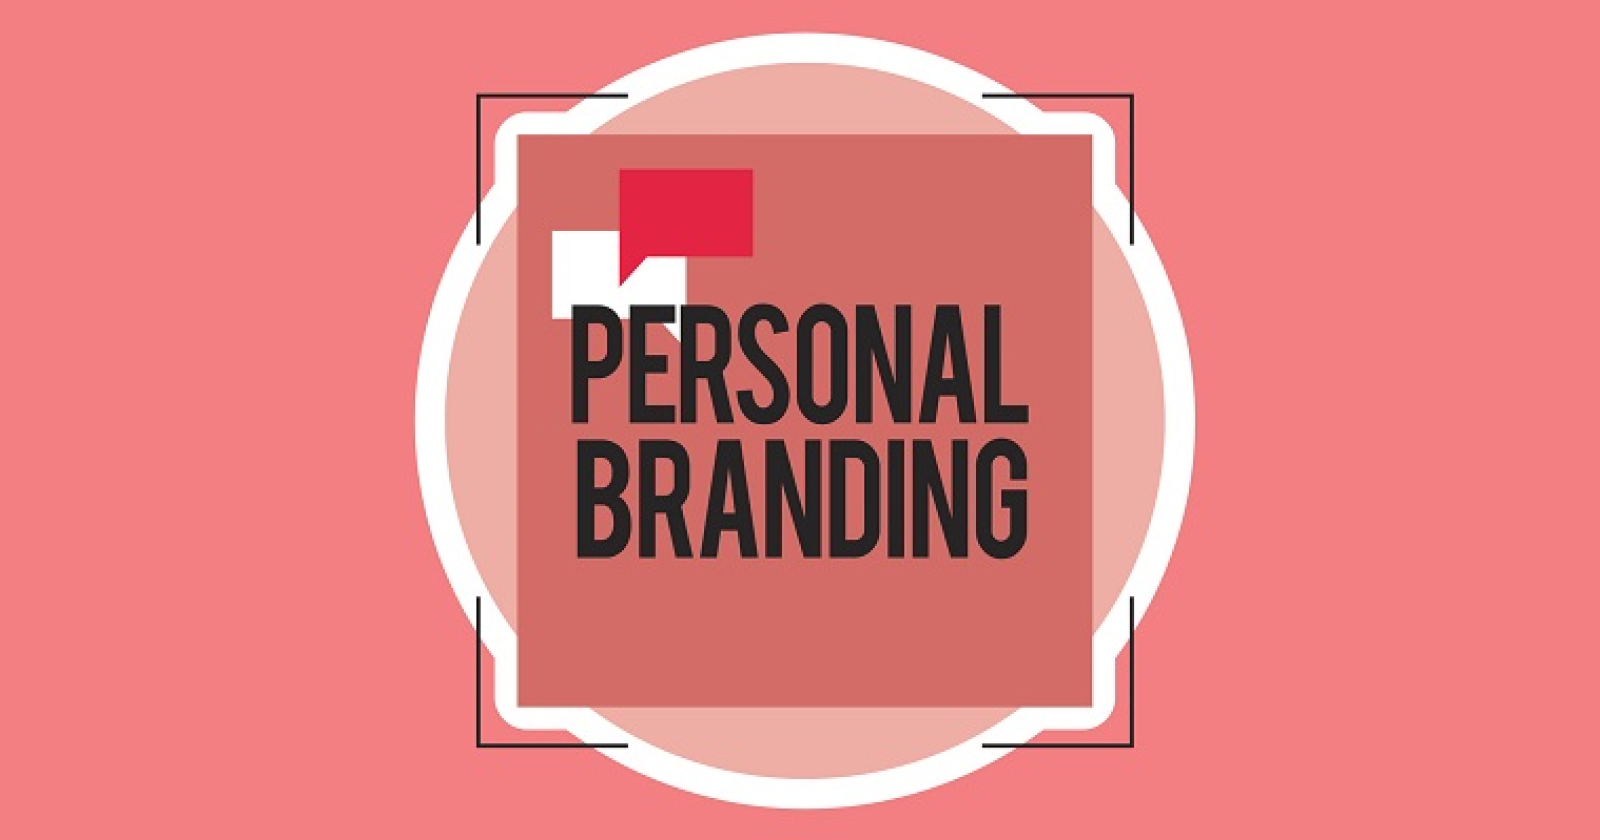 How to Write a Personal Brand Statement - Opendorse